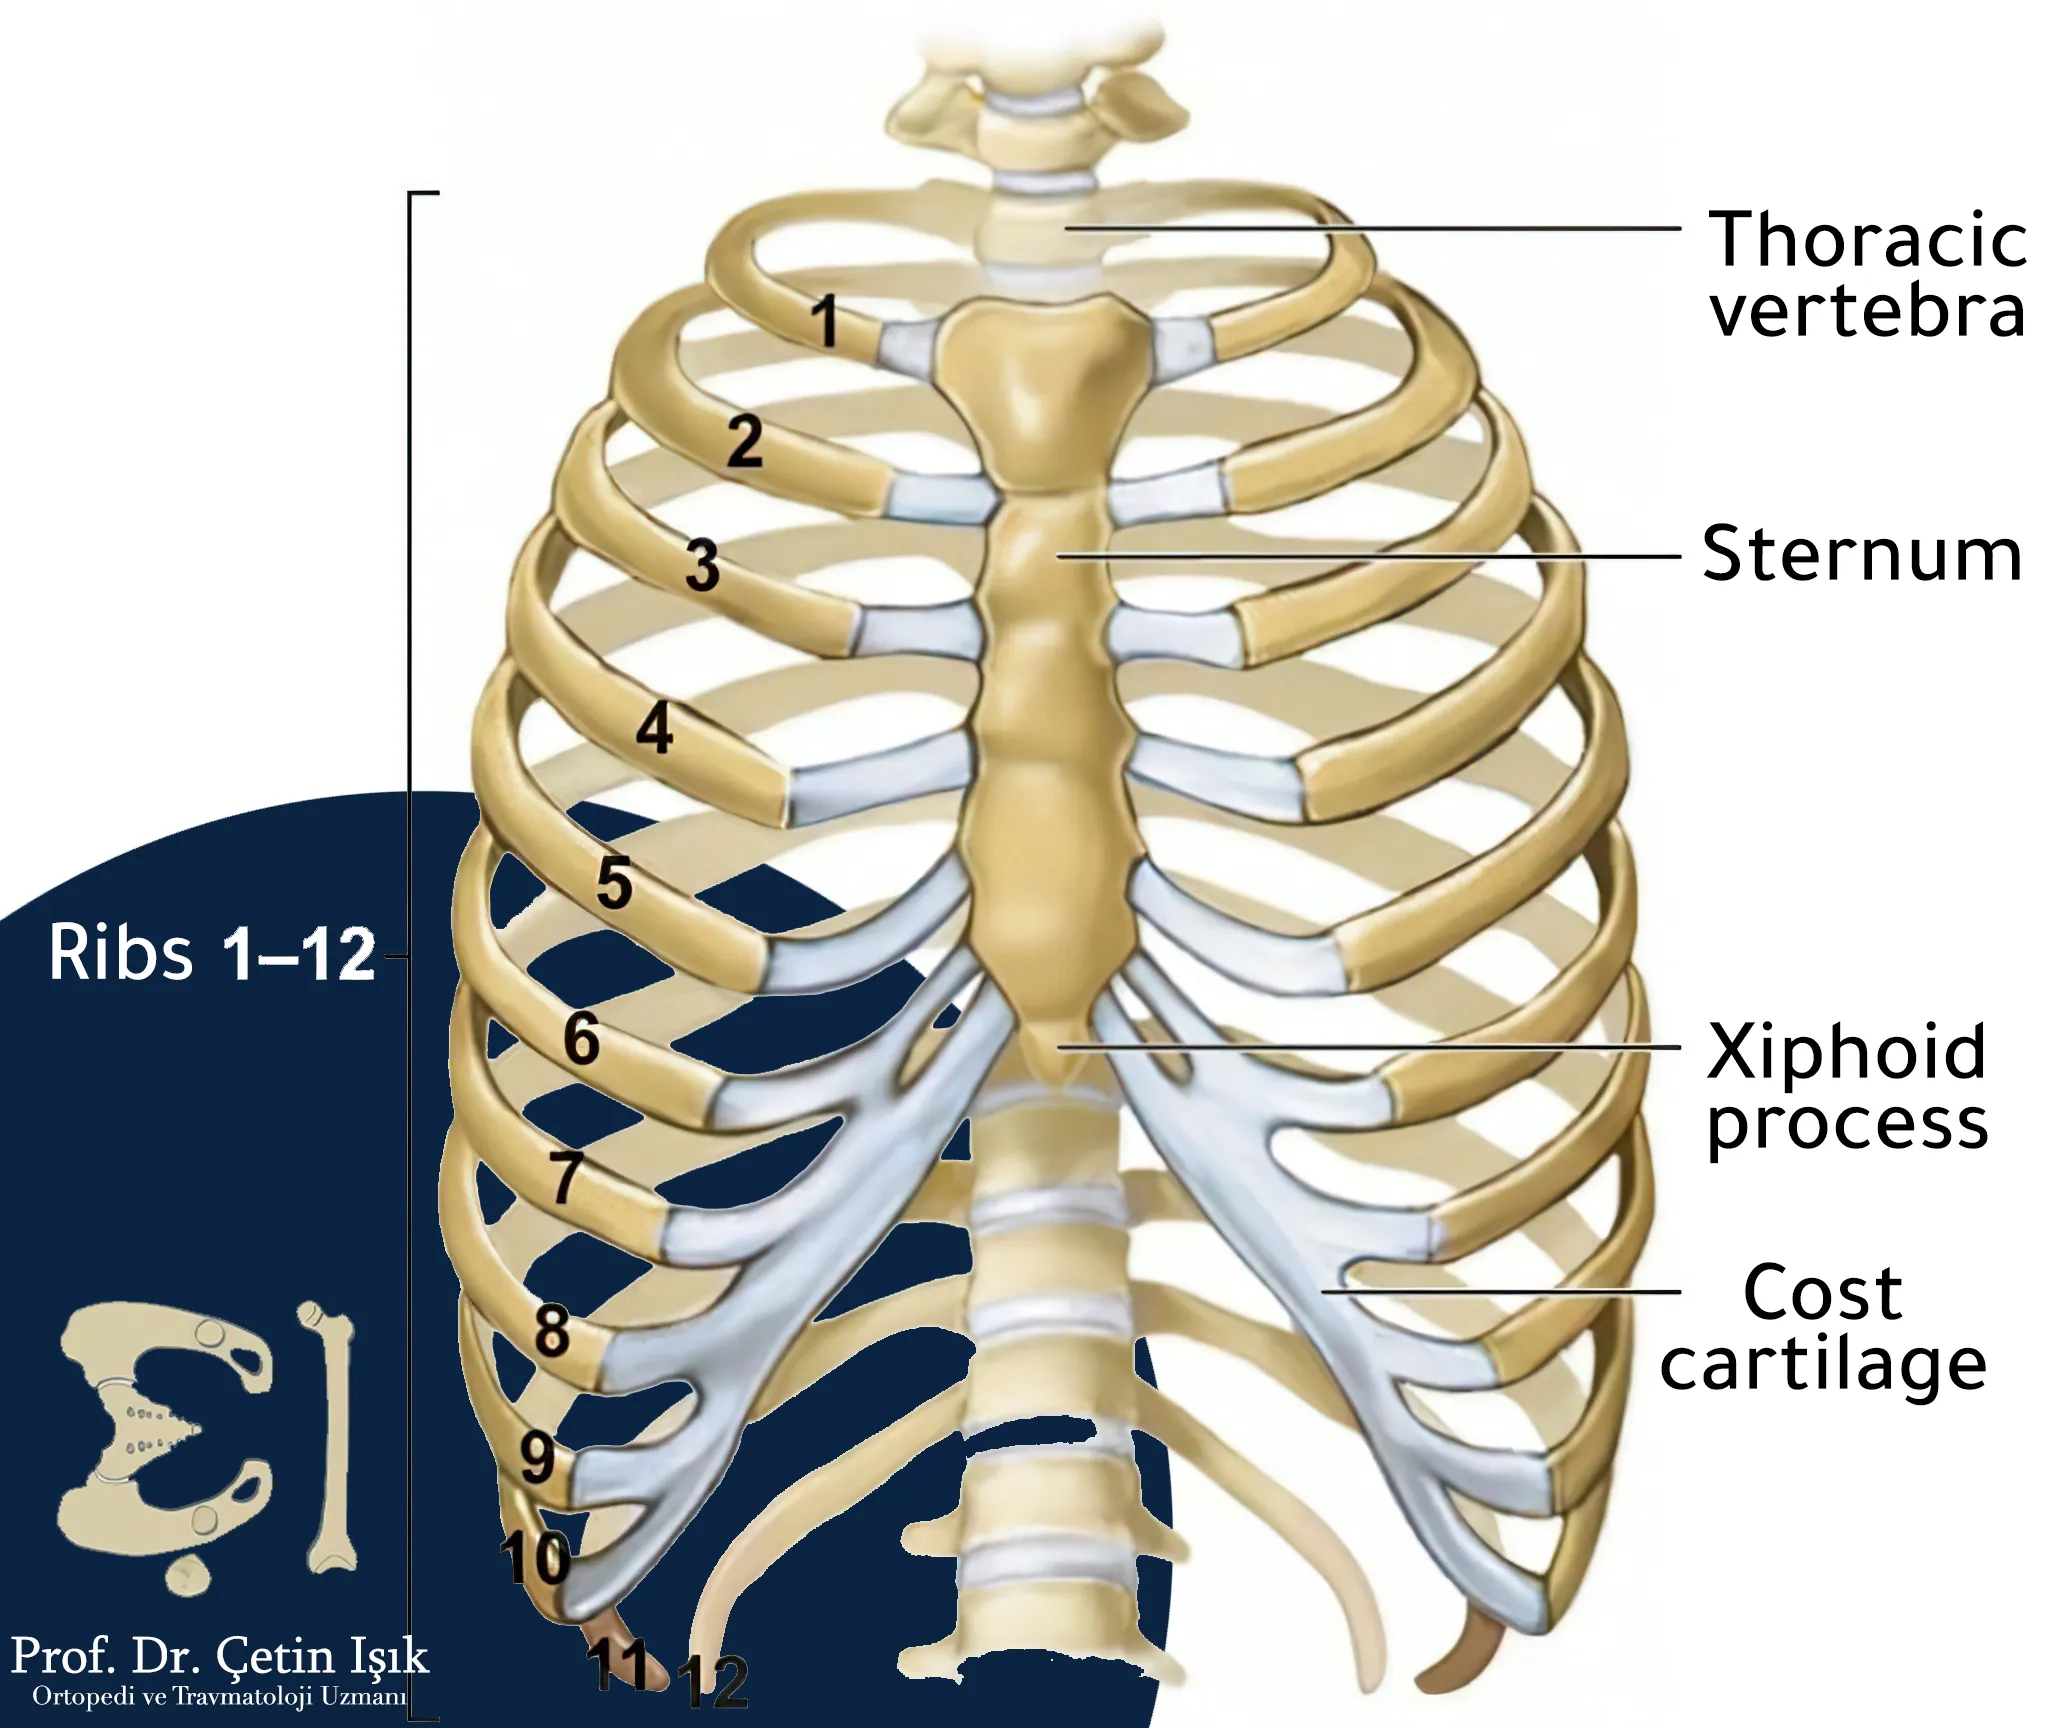 We notice from the picture that the rib cage consists of the sternum, thoracic vertebrae, and ribs, and there are 12 pairs of ribs, where the first seven ribs are connected to the sternum directly, while the next three ribs are connected indirectly to the sternum through the costal cartilages, and the last two ribs do not connect to the sternum